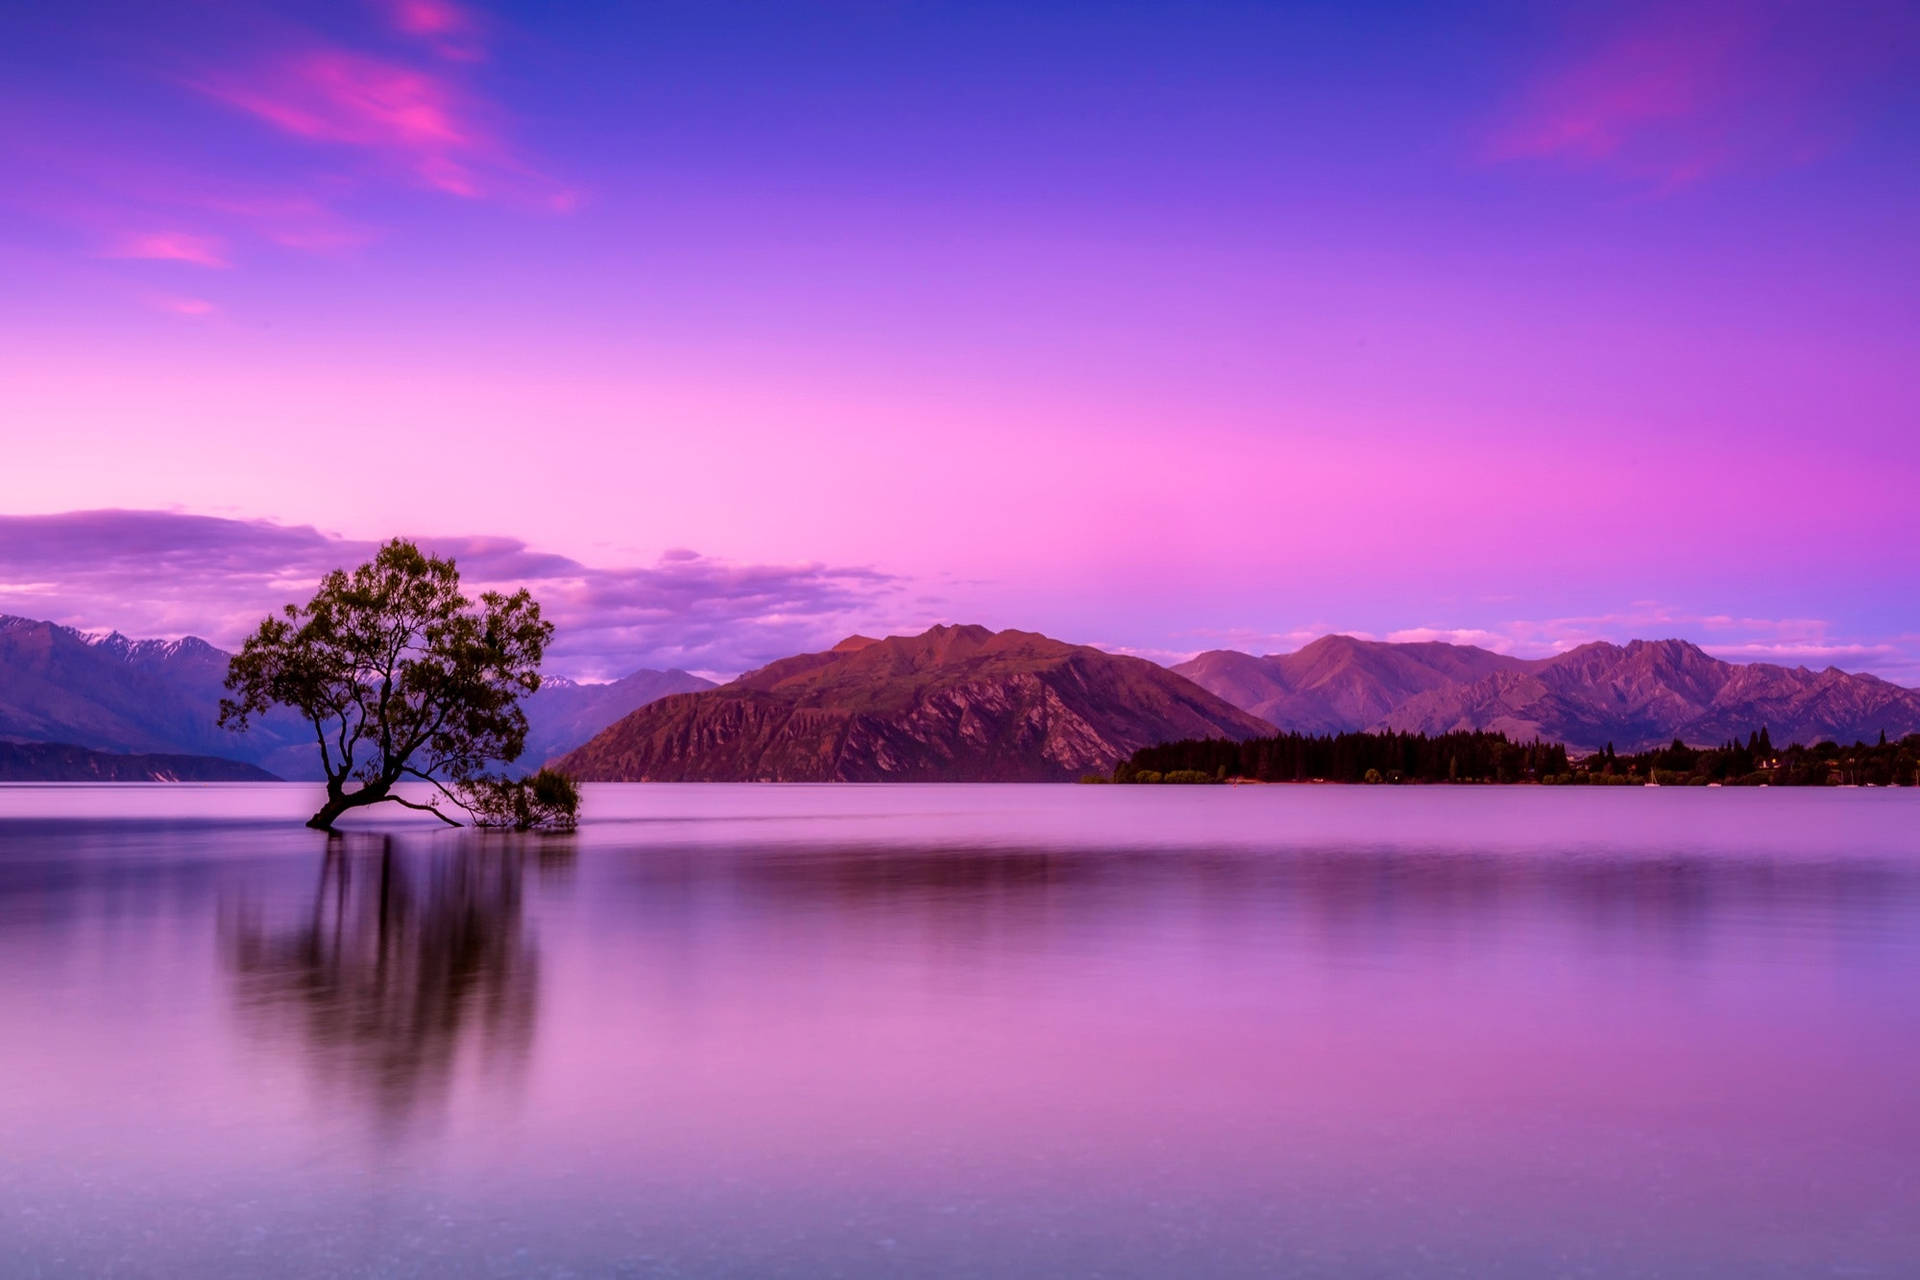 Aesthetic Sky Of Violet Over Mountains Wallpaper